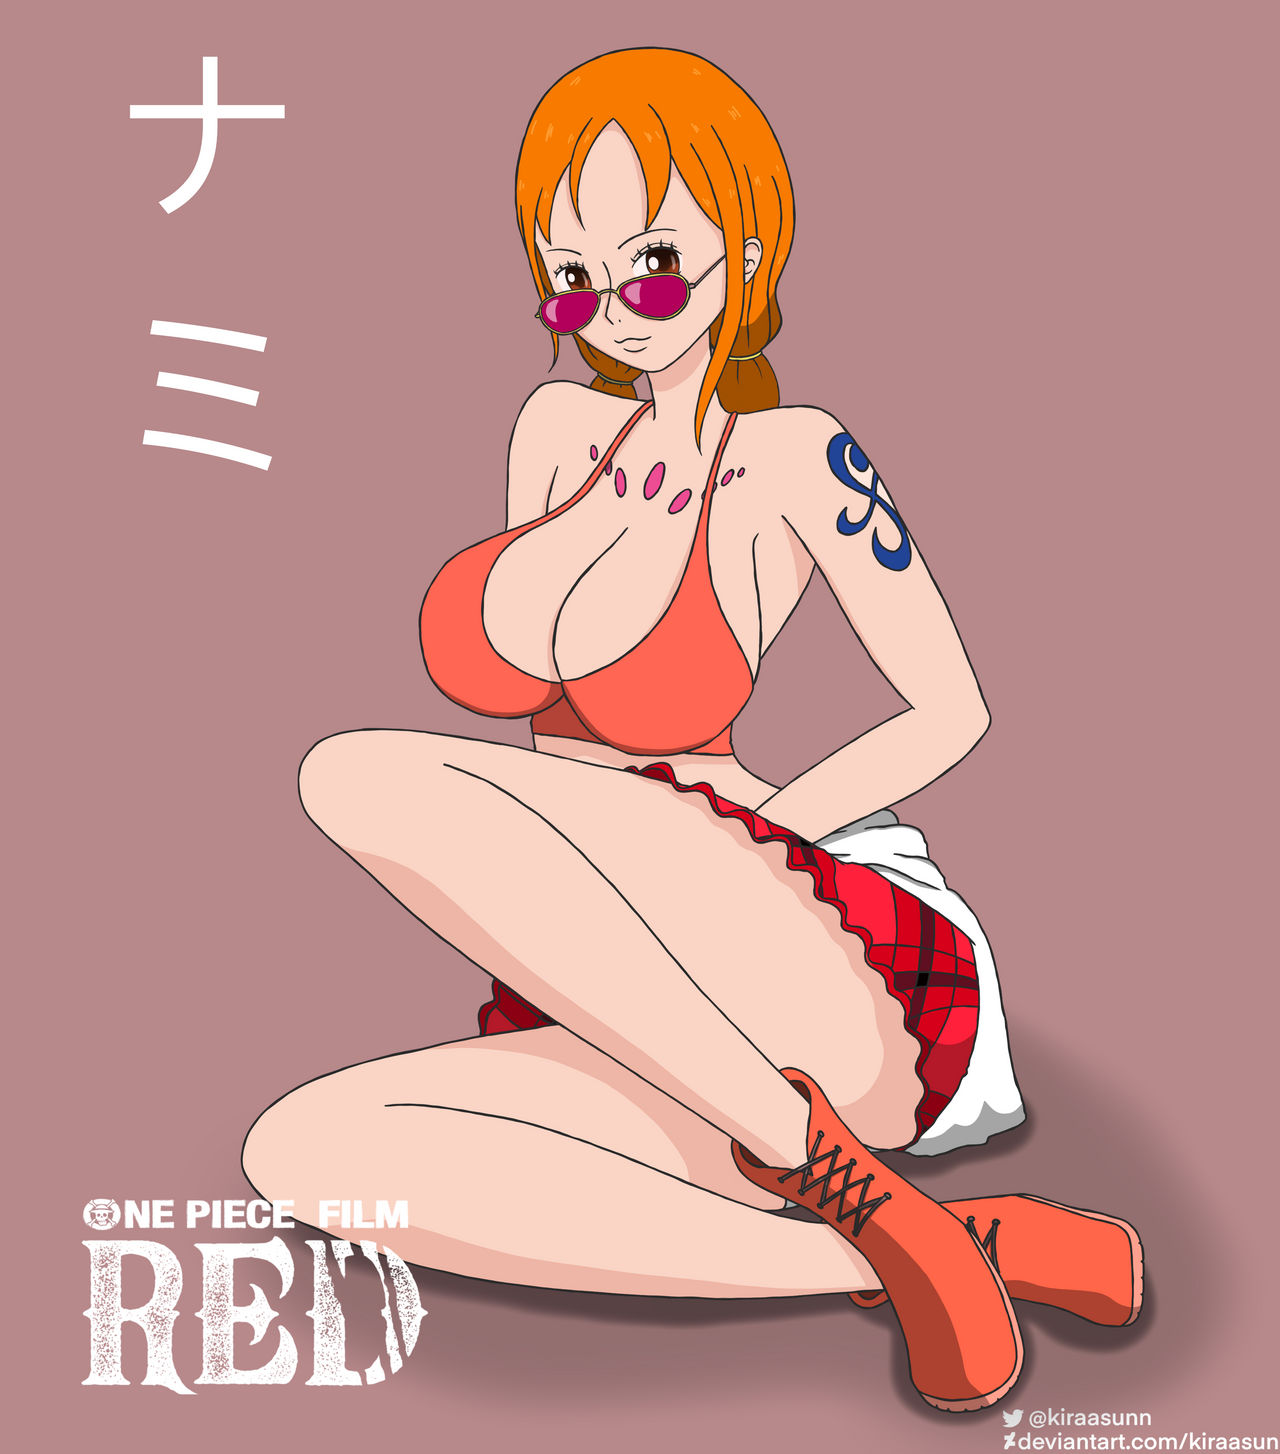 Nami - RED Movie - One Piece by caiquenadal on DeviantArt